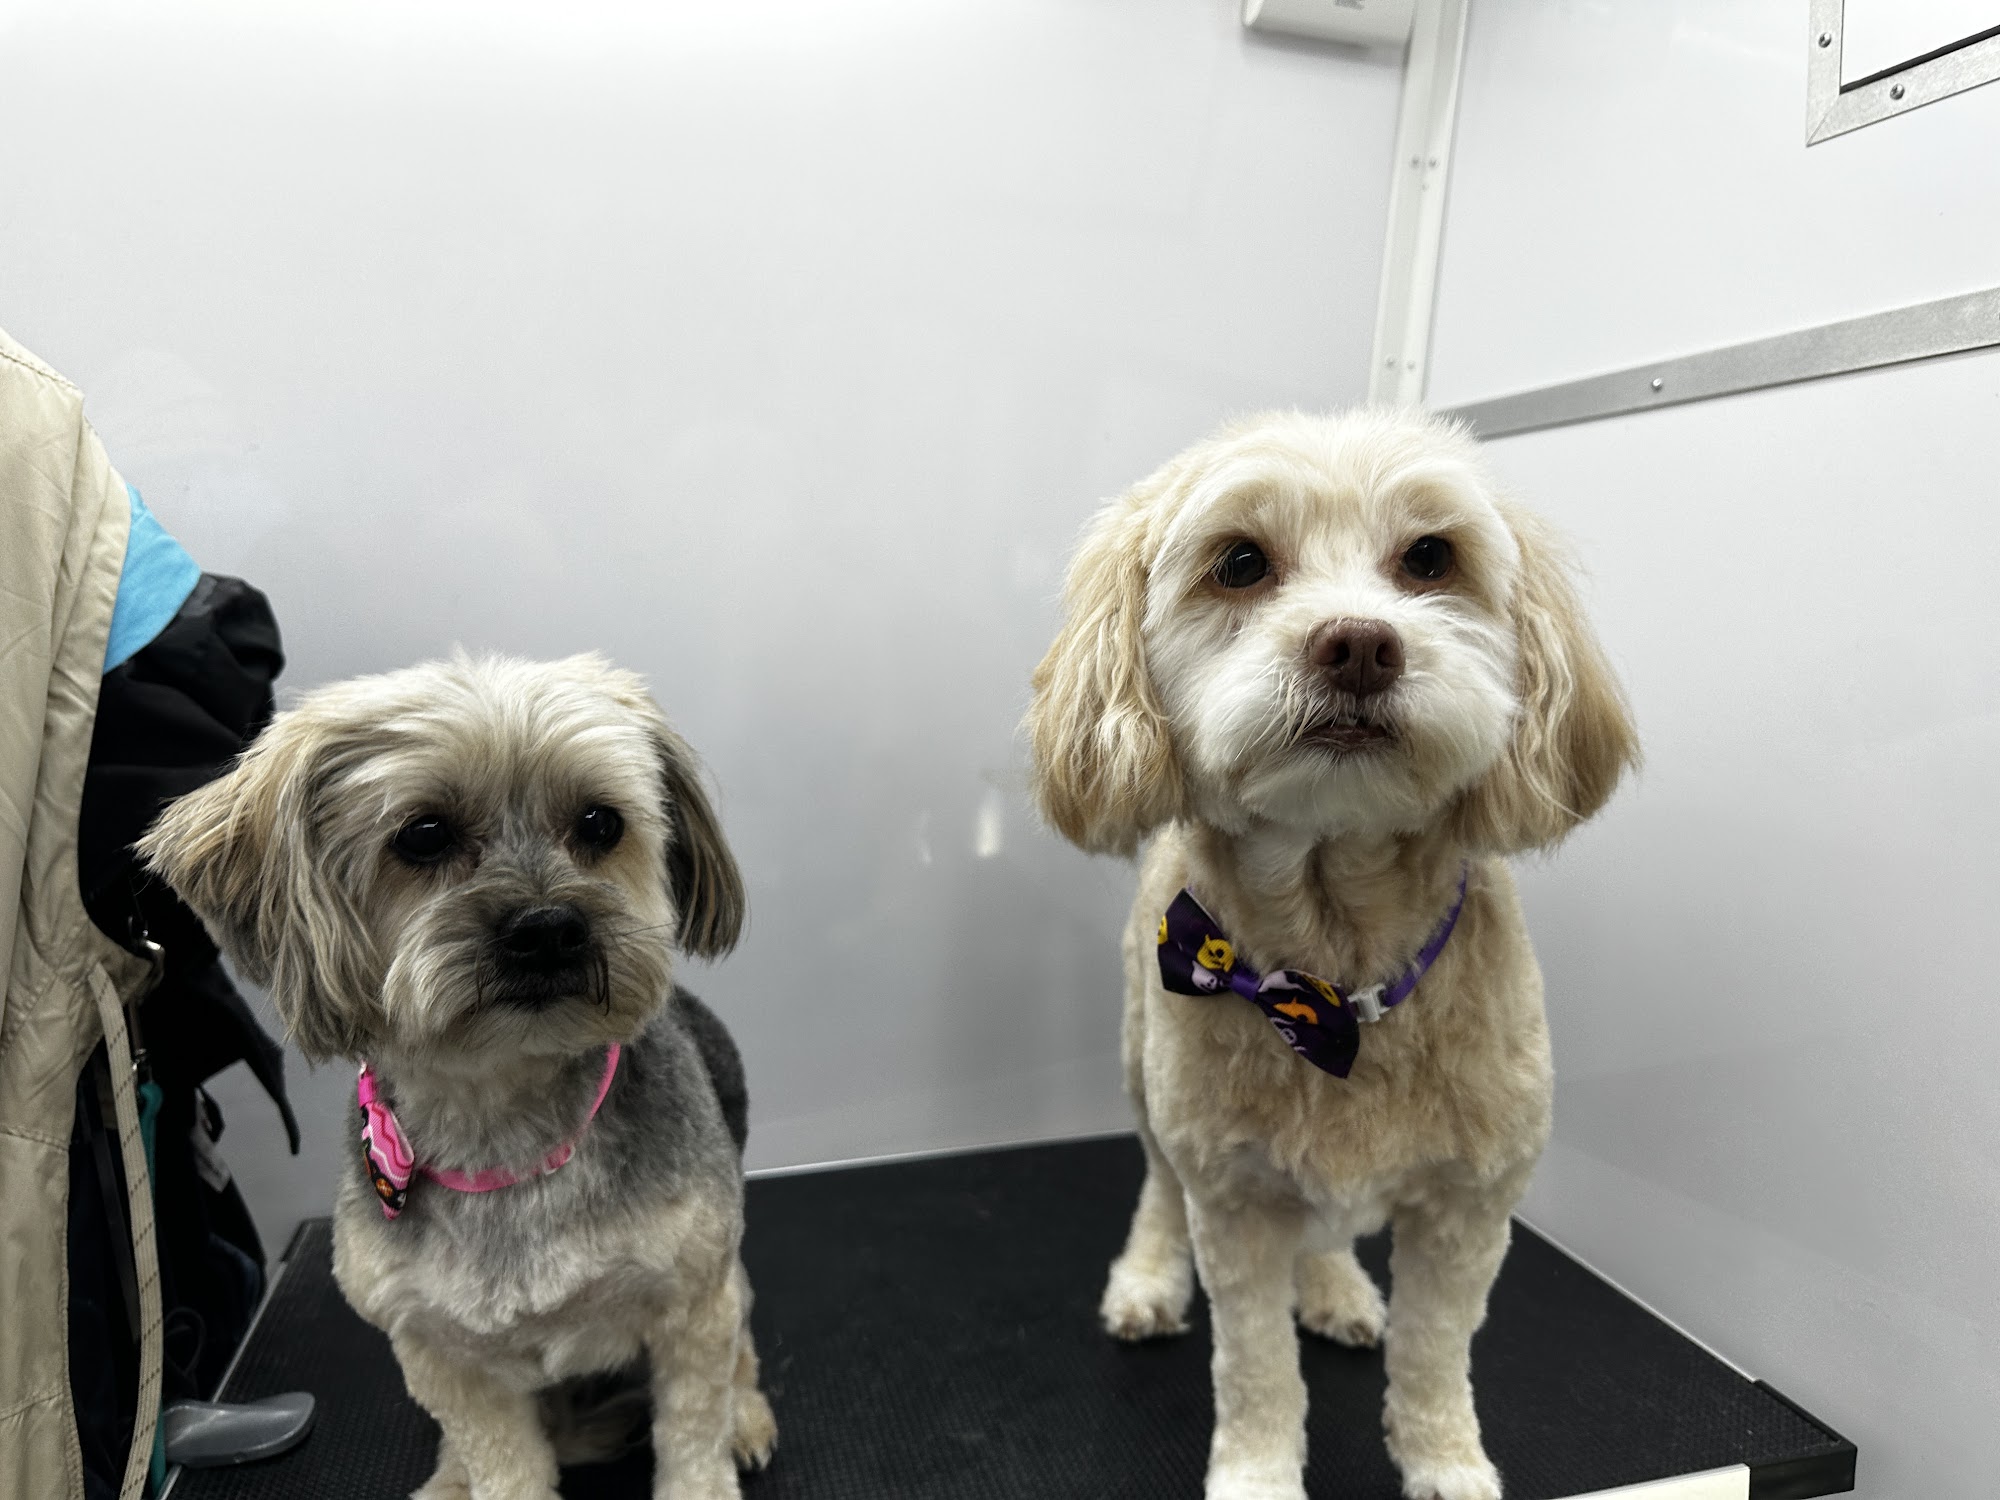 The Little Dog Salon Mobile Dog Grooming and Skin Care